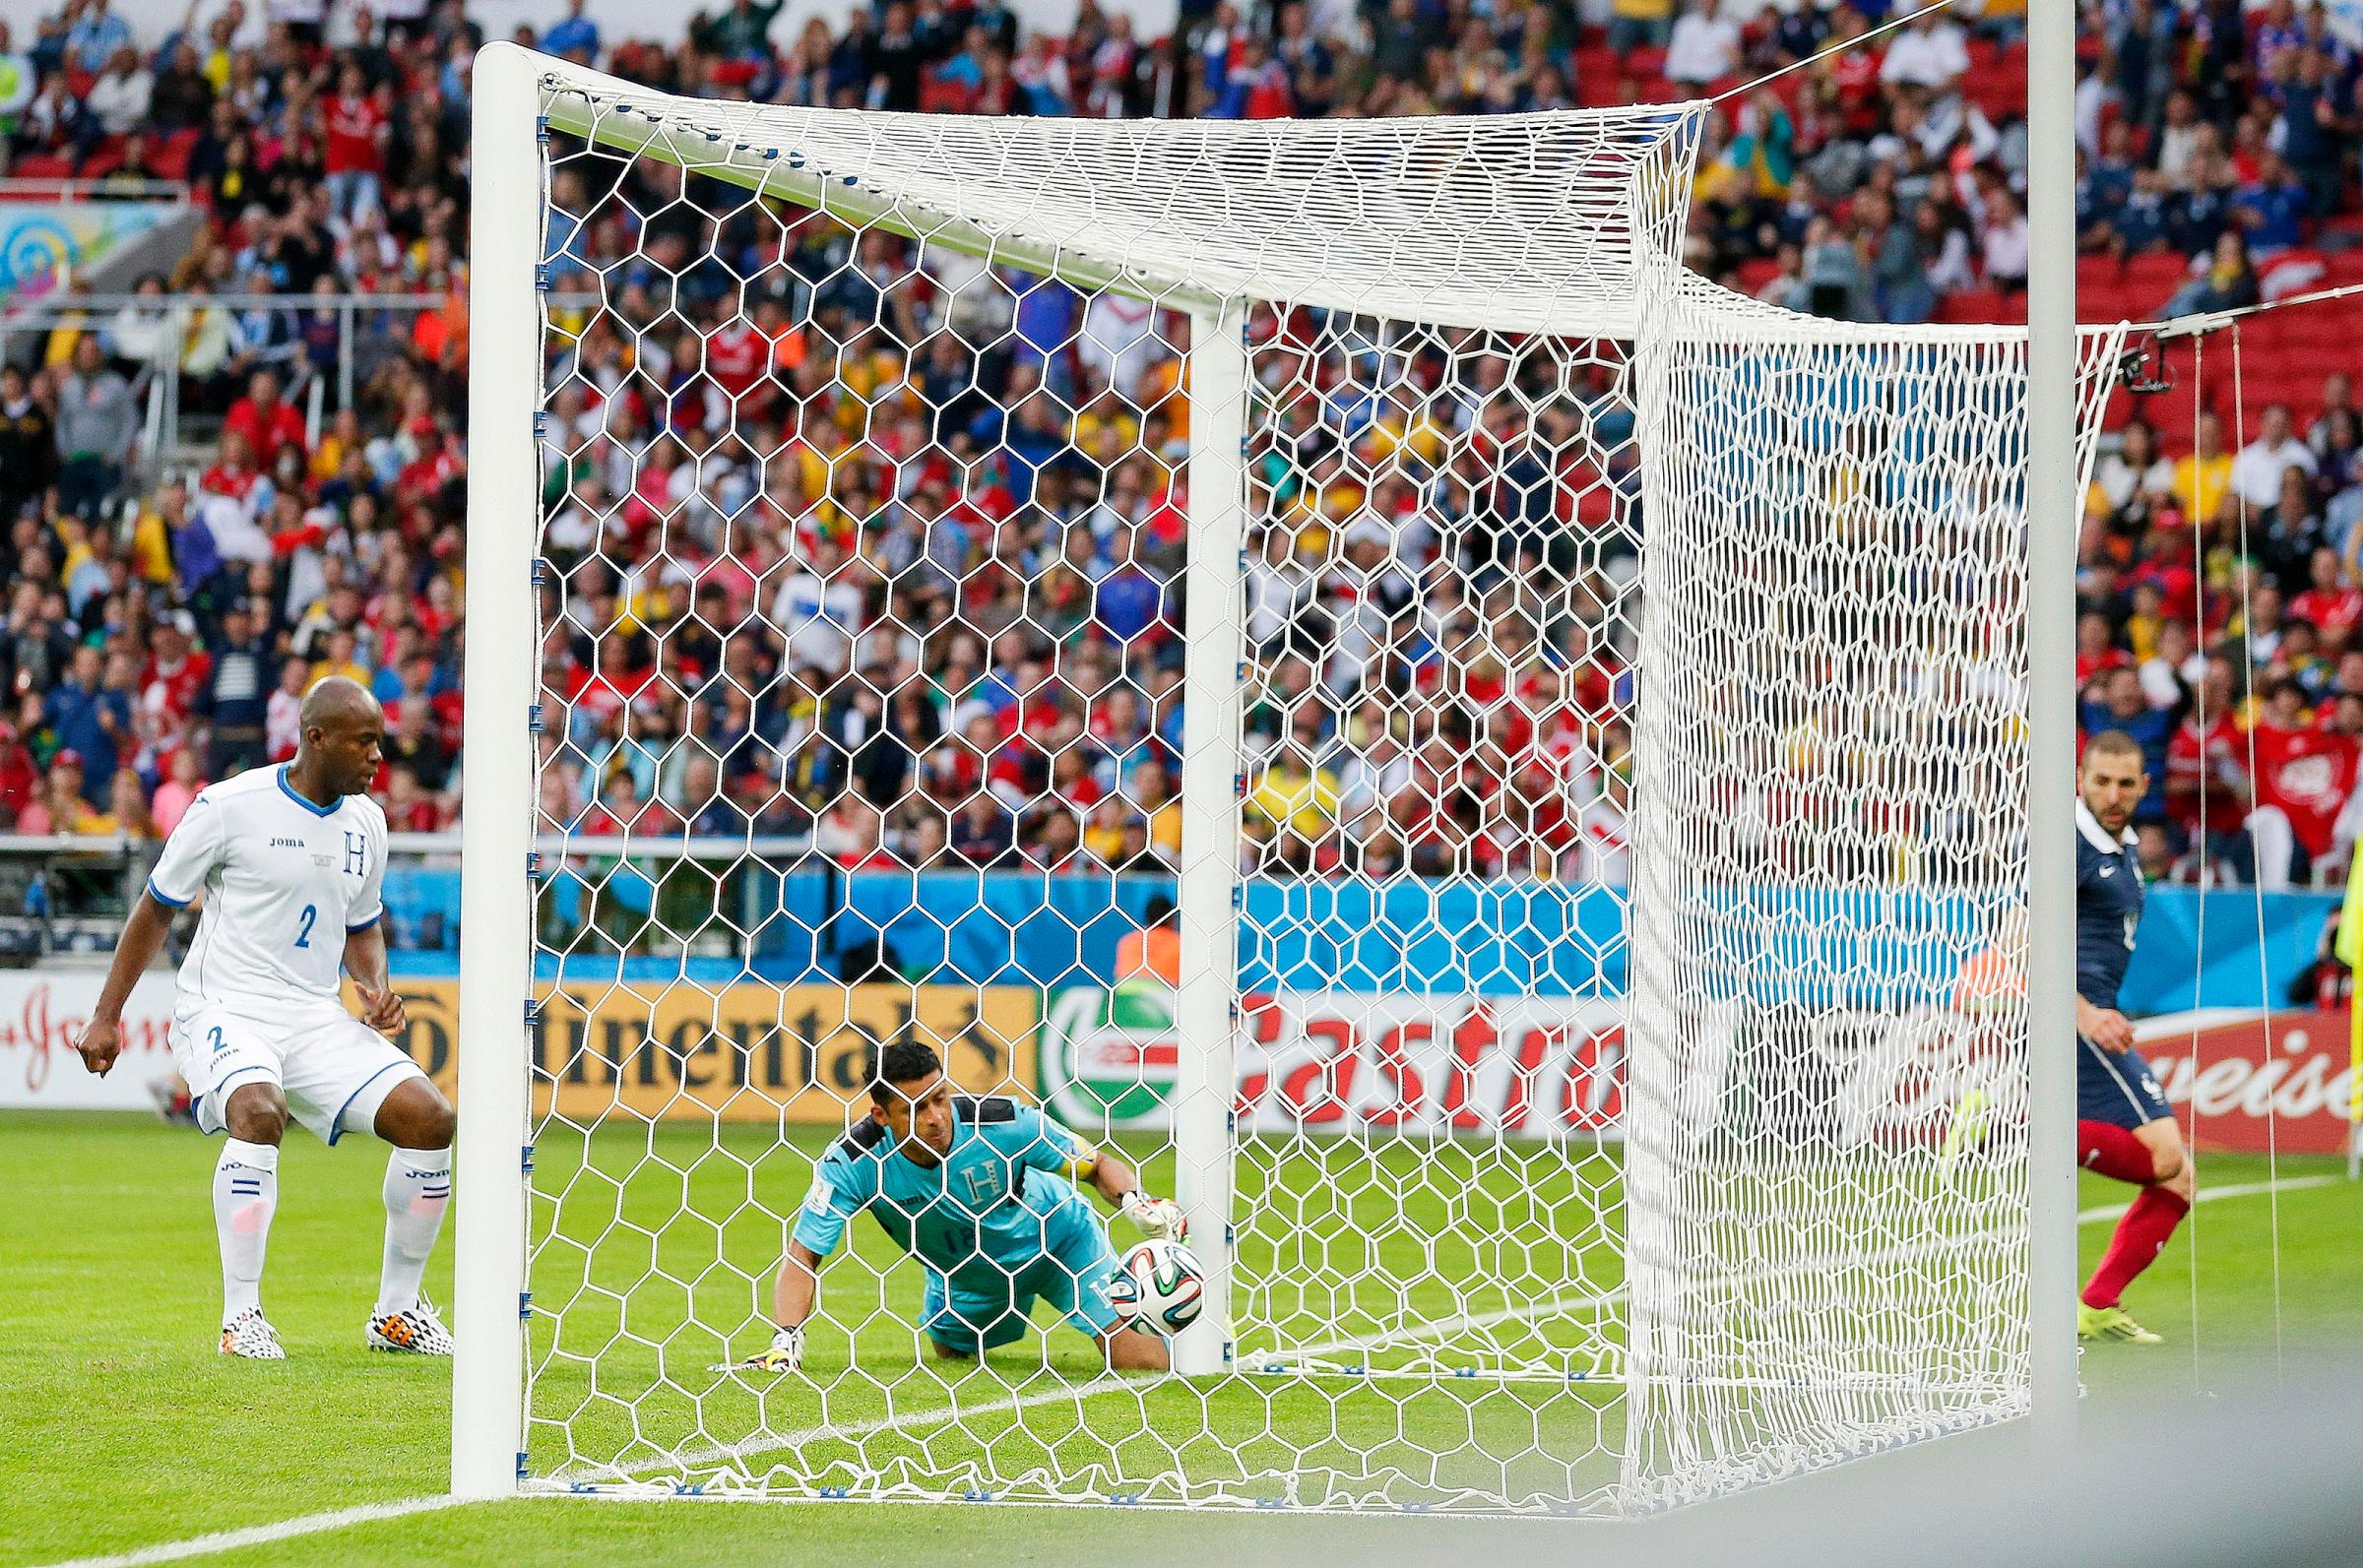 Honduras' goalkeeper Noel Valladares bundles a shot from France's Karim Benzema, far right, into his net for an own goal during the group E World Cup soccer match between France and Honduras at the Estadio Beira-Rio in Porto Alegre, Brazil on June 15, 2014.